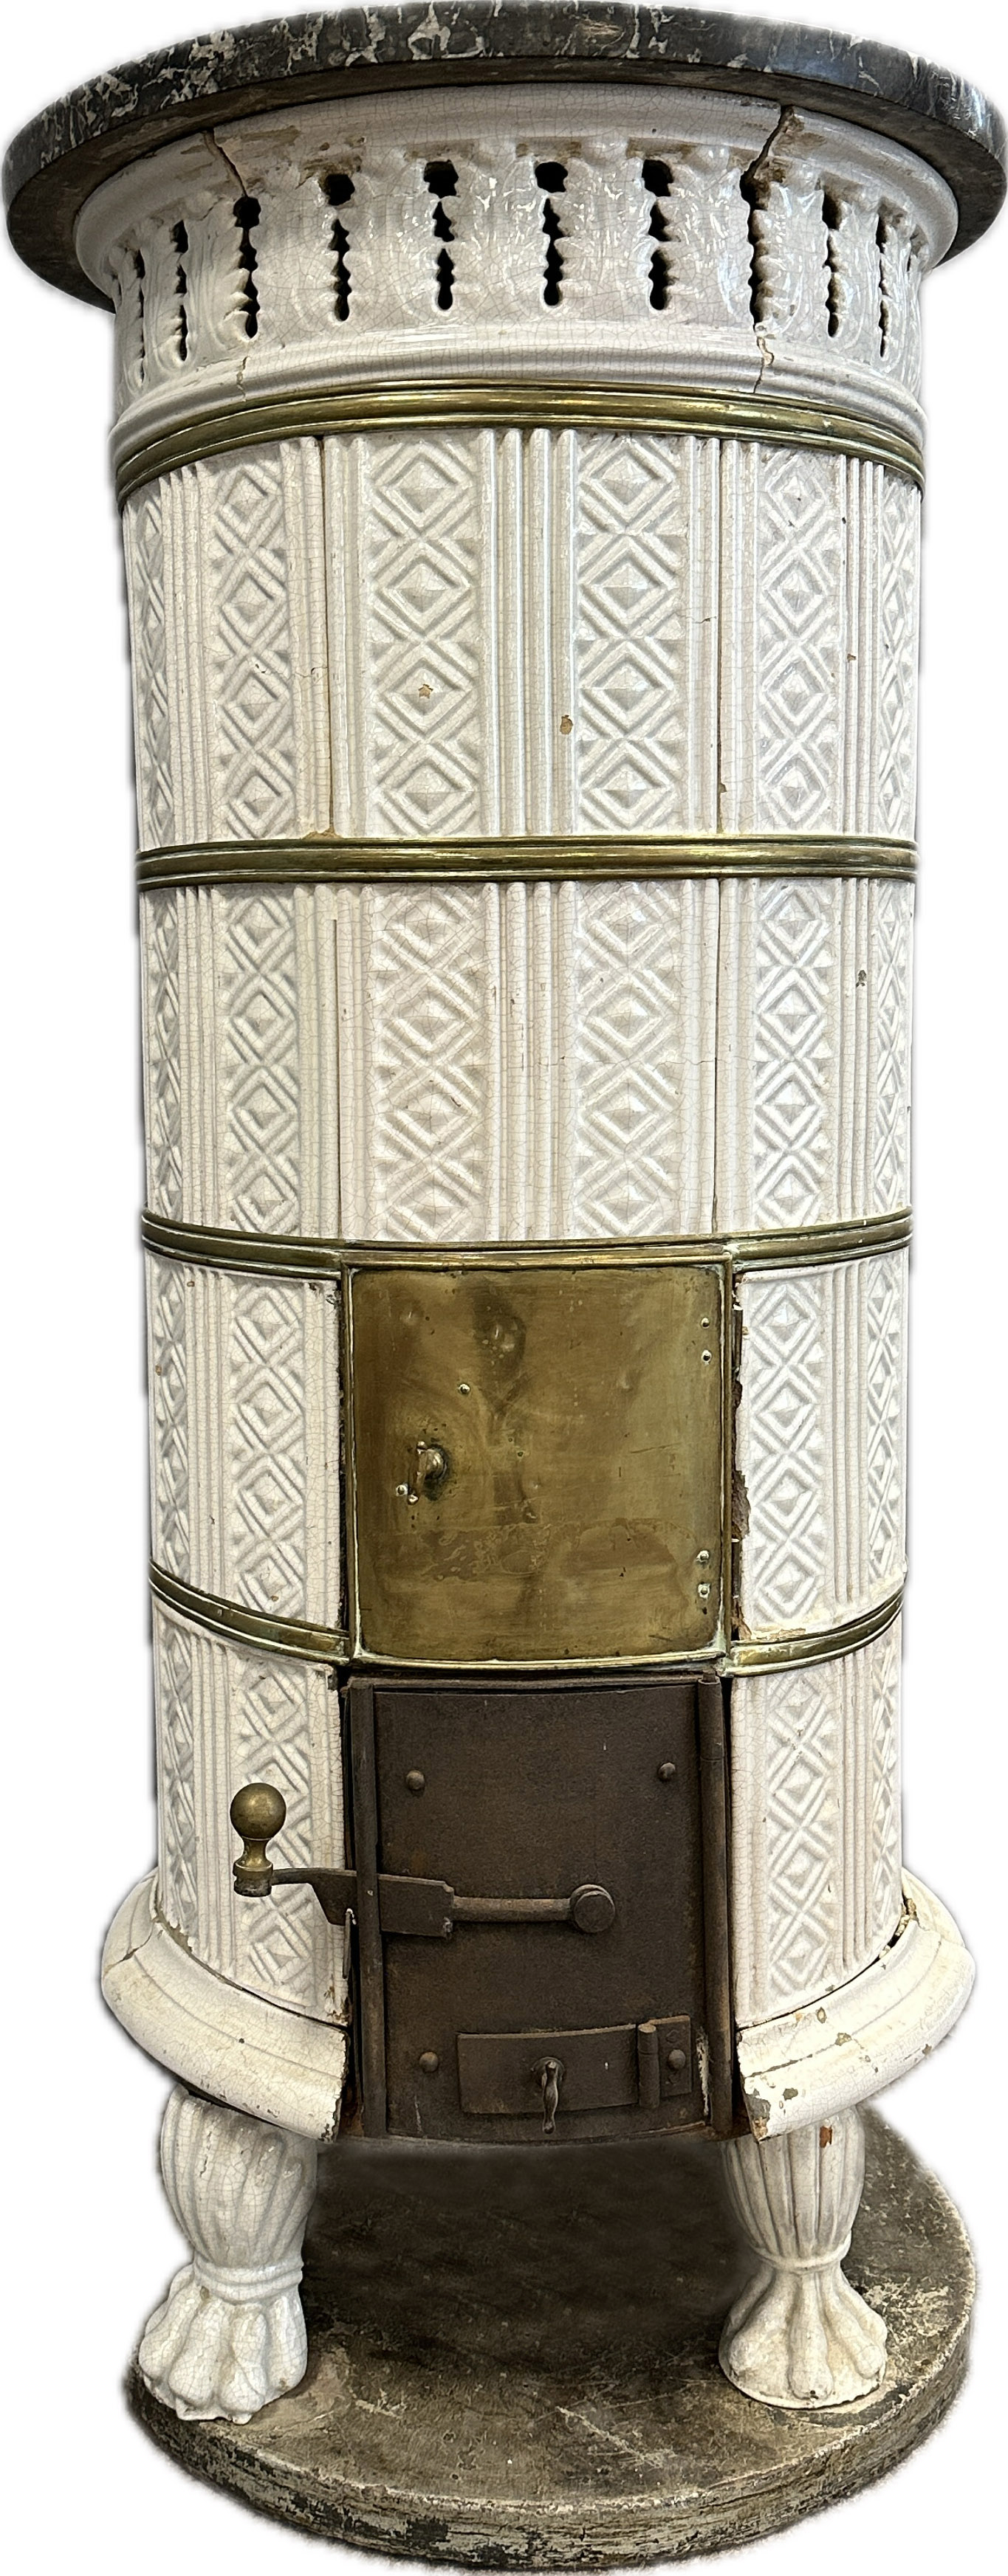 White Biedermeier round stove with tiles in relief structure.